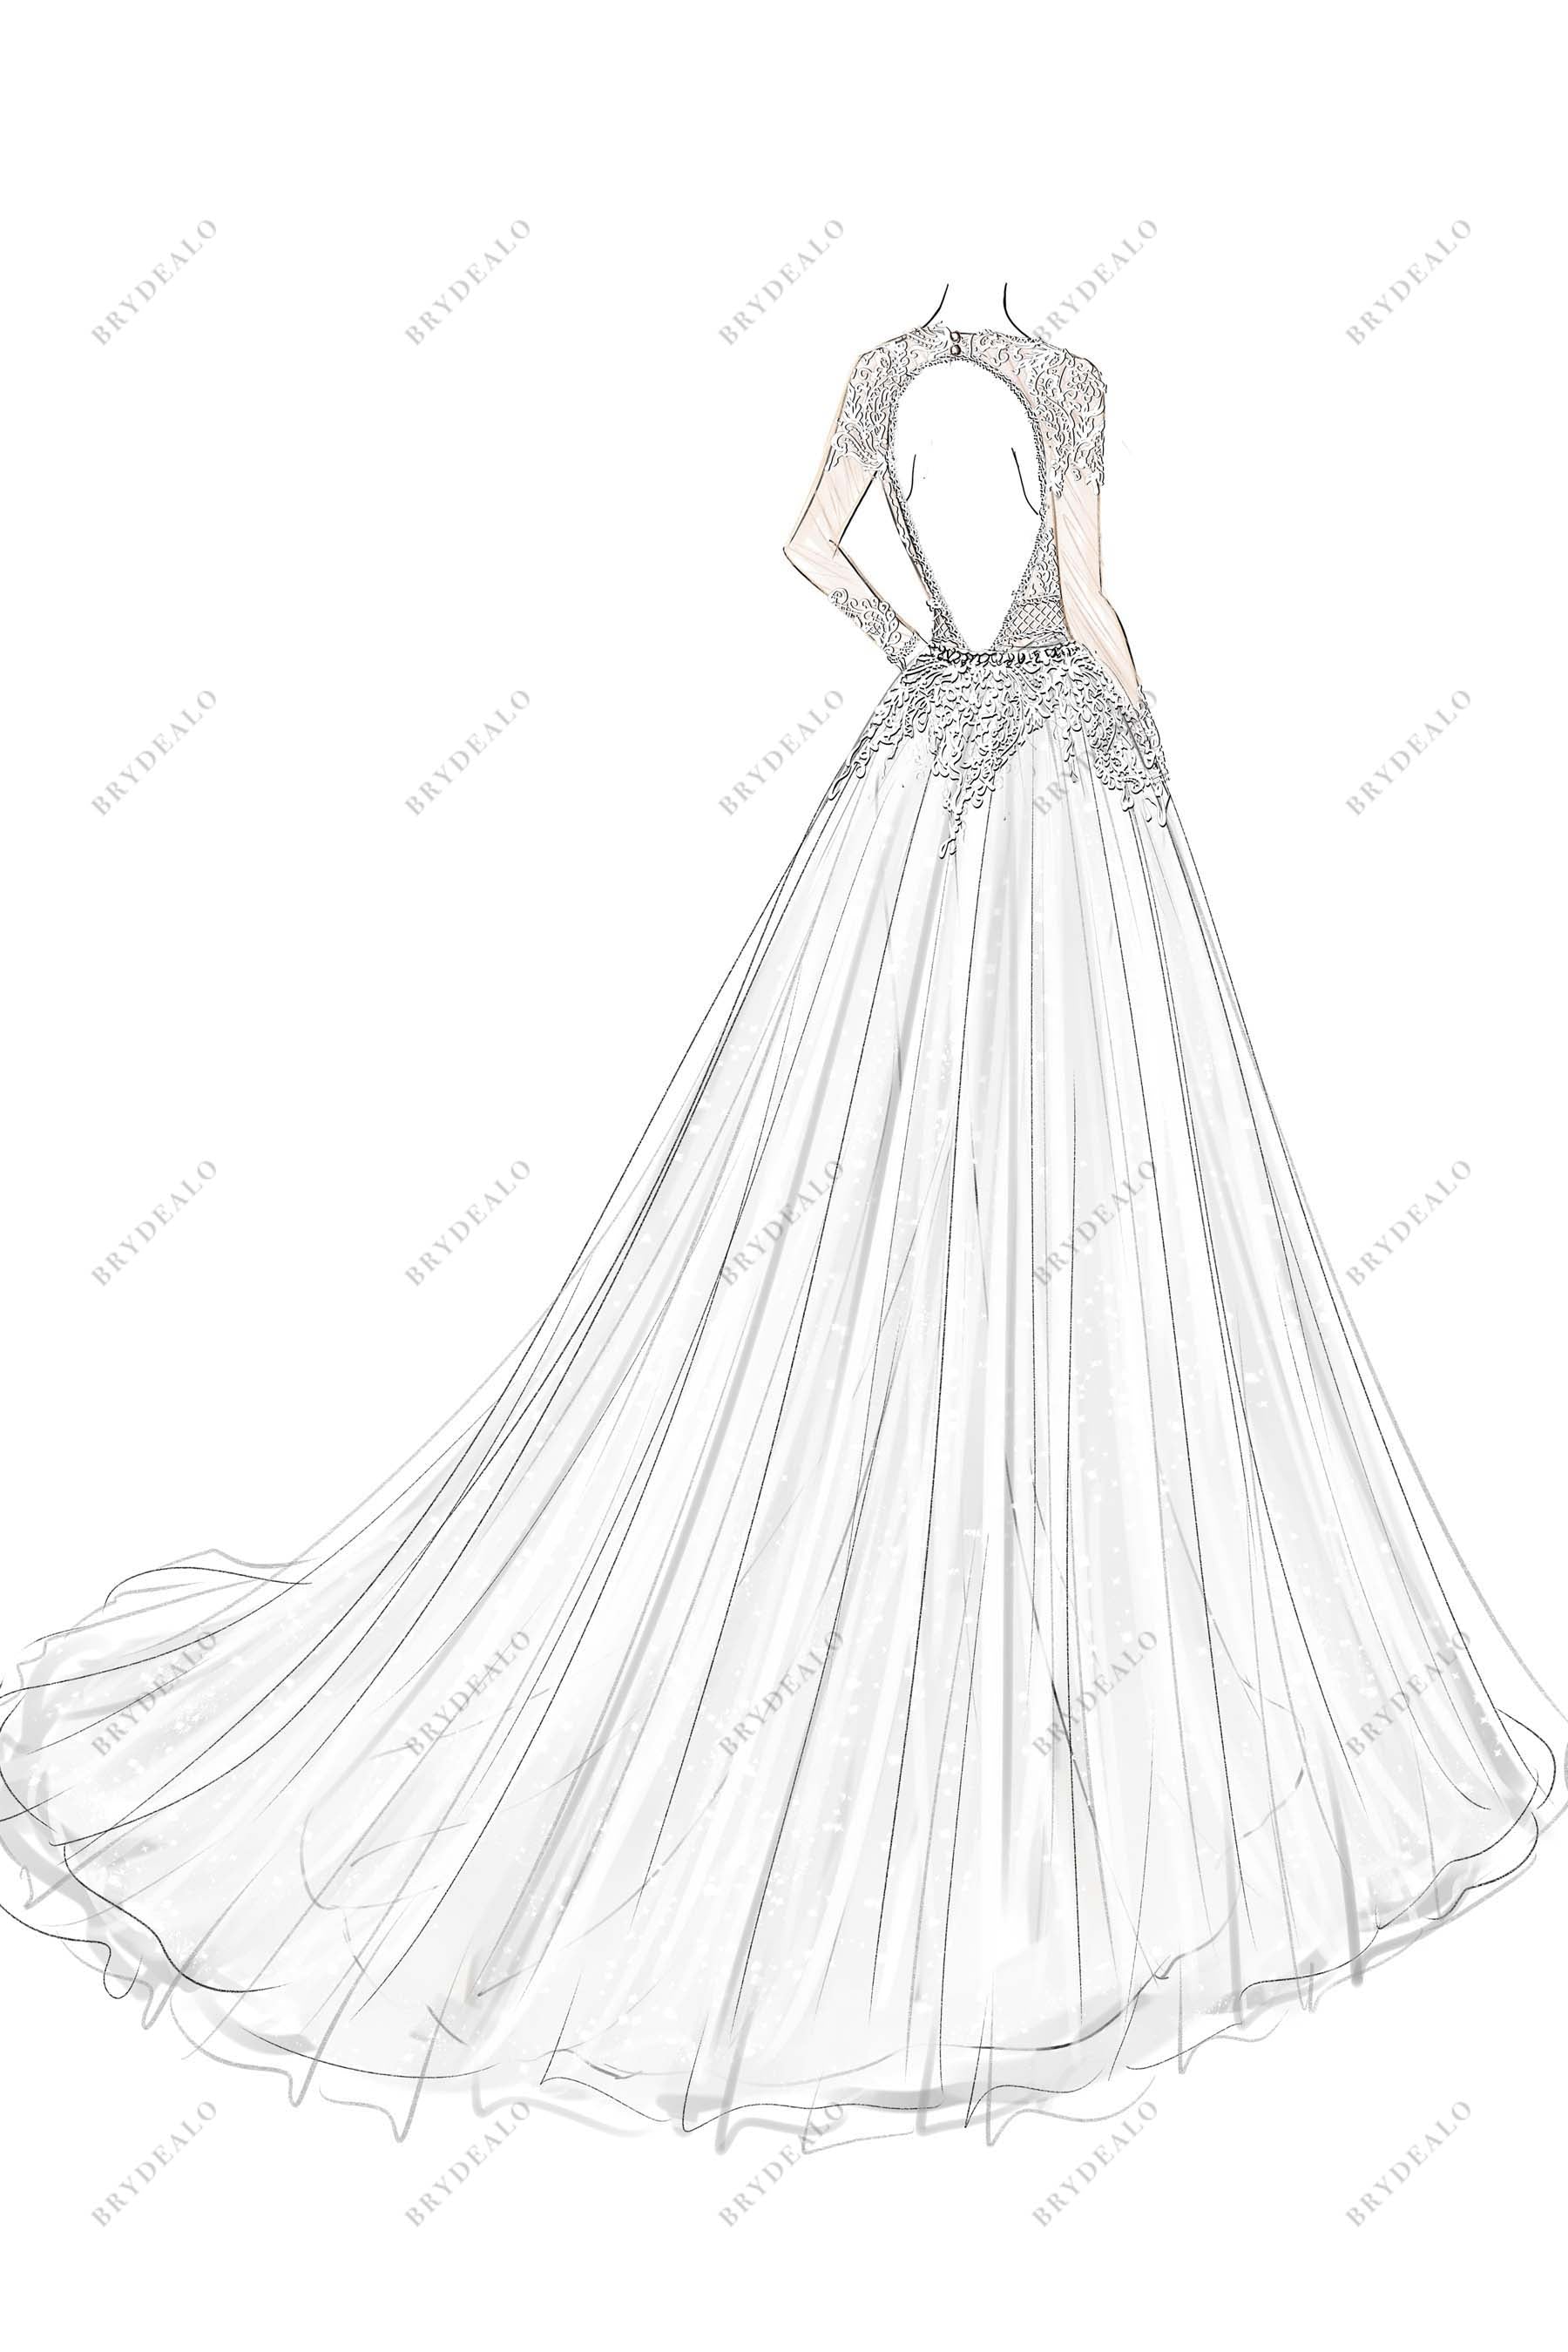 Bridal Gown Sketch Stock Photos and Images - 123RF